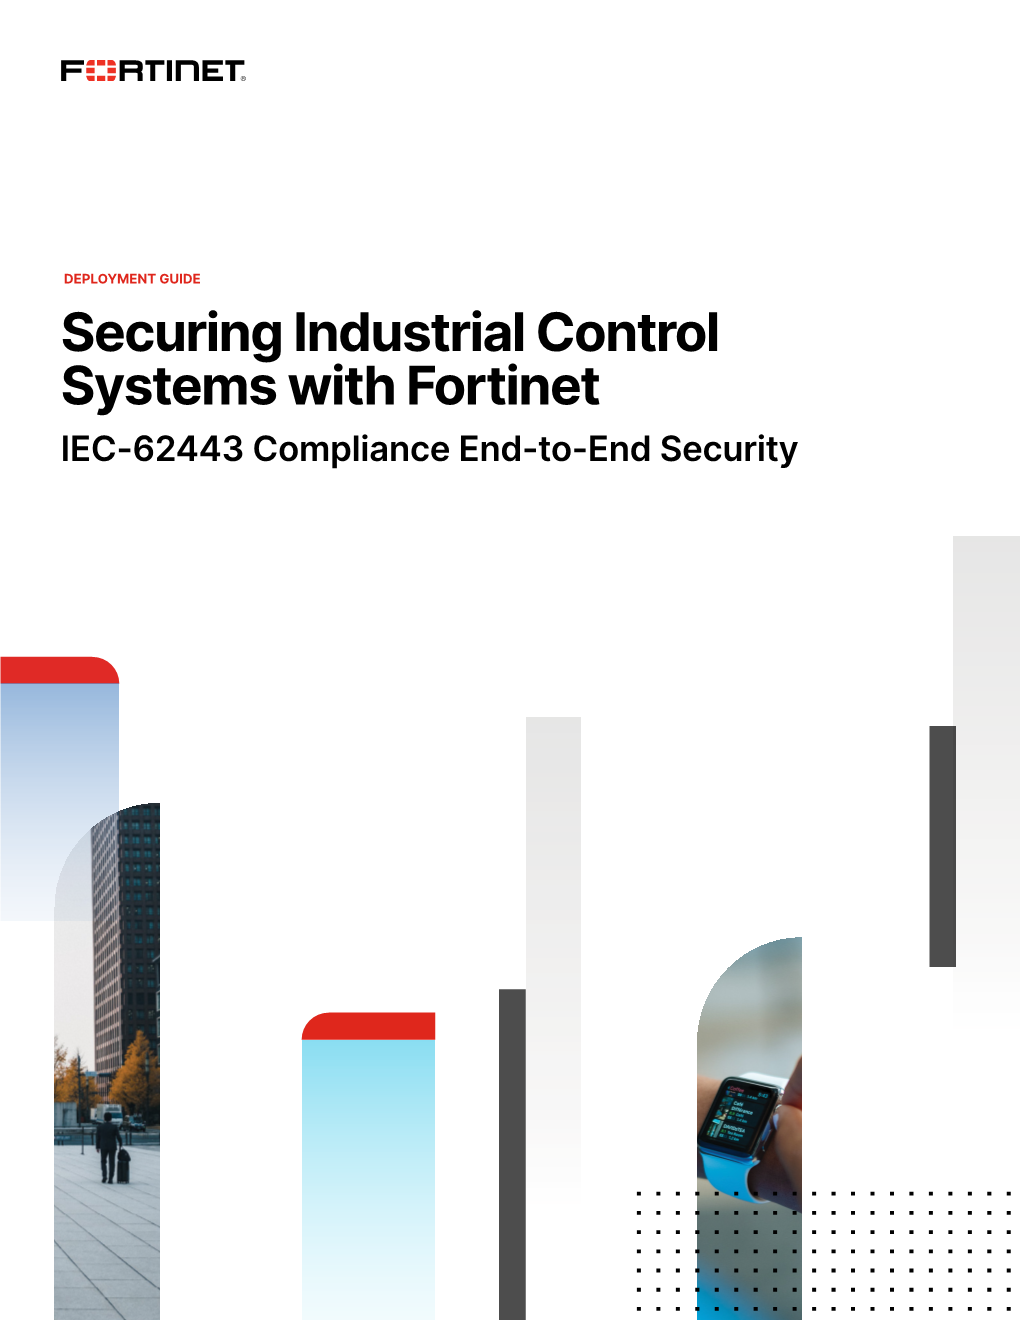 Securing Industrial Control Systems with Fortinet IEC-62443 Compliance End-To-End Security Table of Content